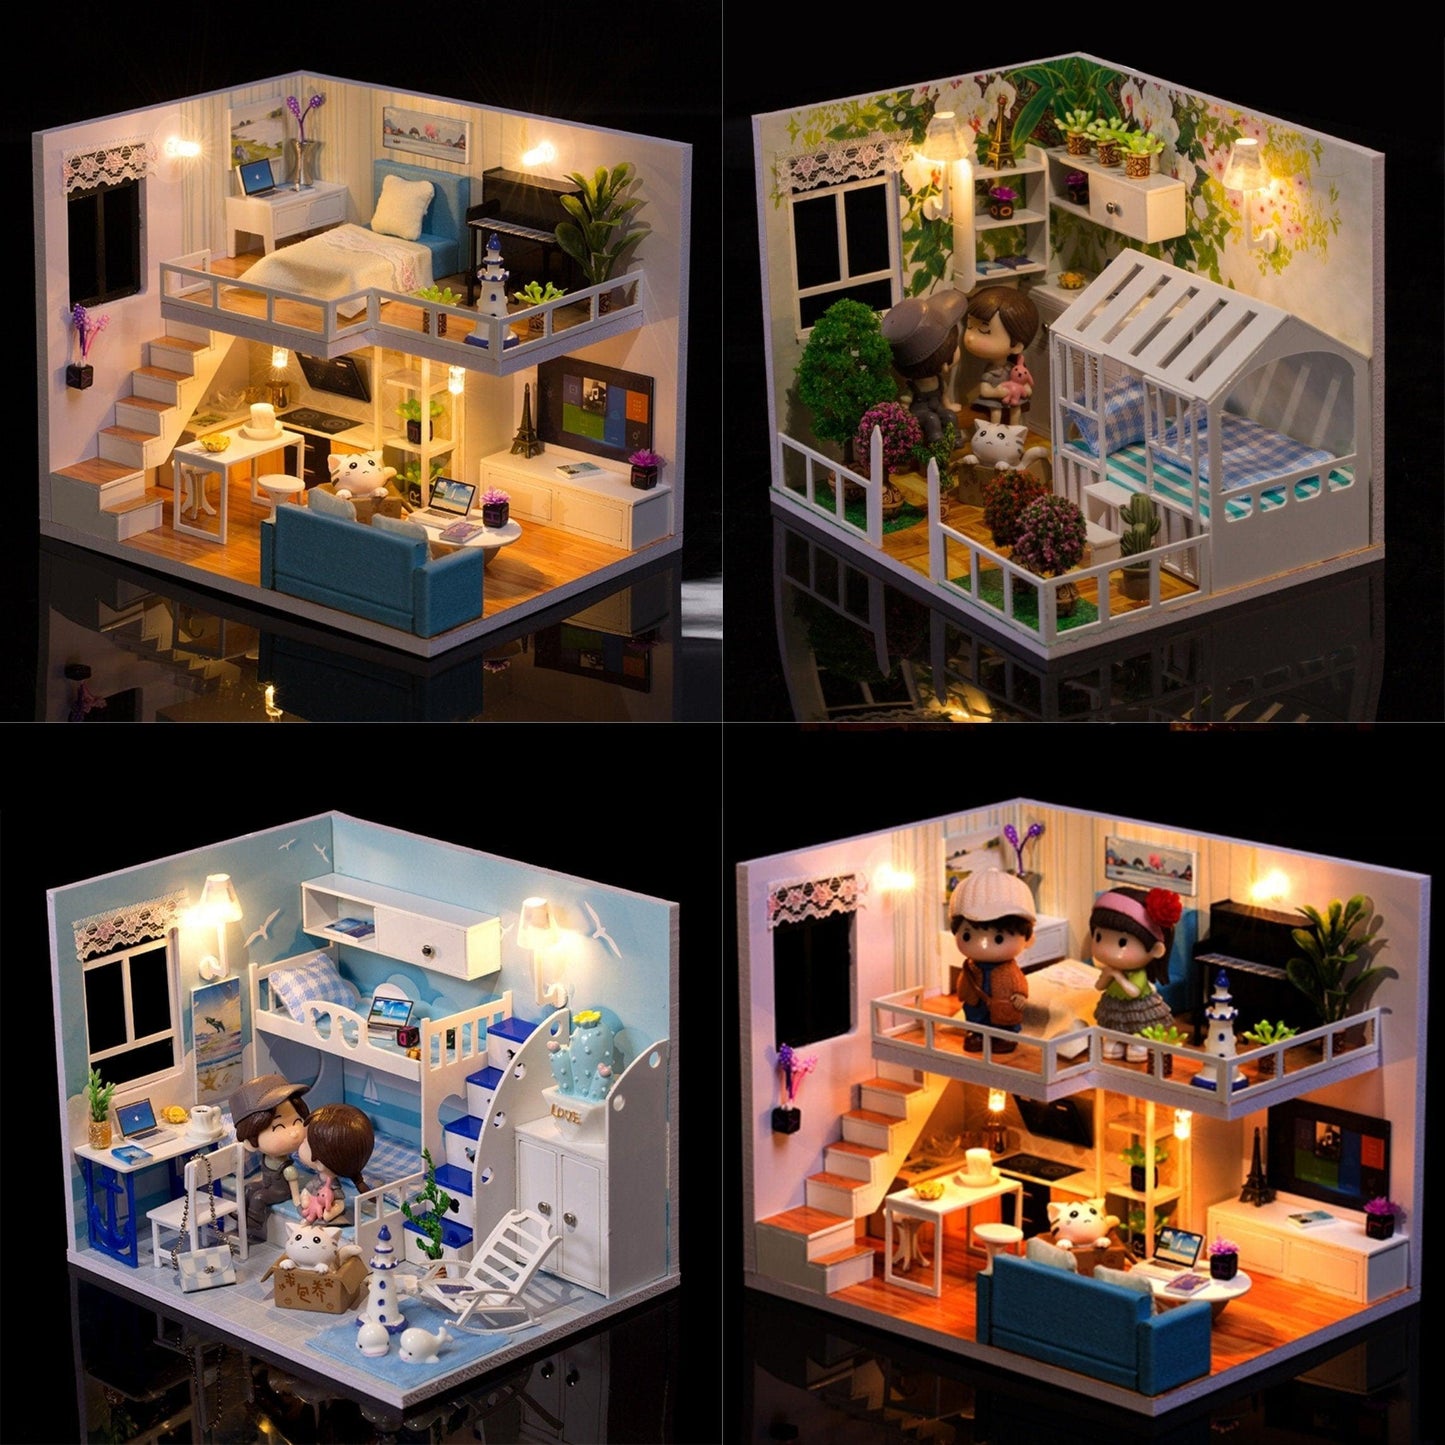 Finished Dollhouse - Fully Completed Miniature Doll House - Best Girlfriend Gifts - Dollhouse Gift - Birthday, Christmas Gift Box & Dolls